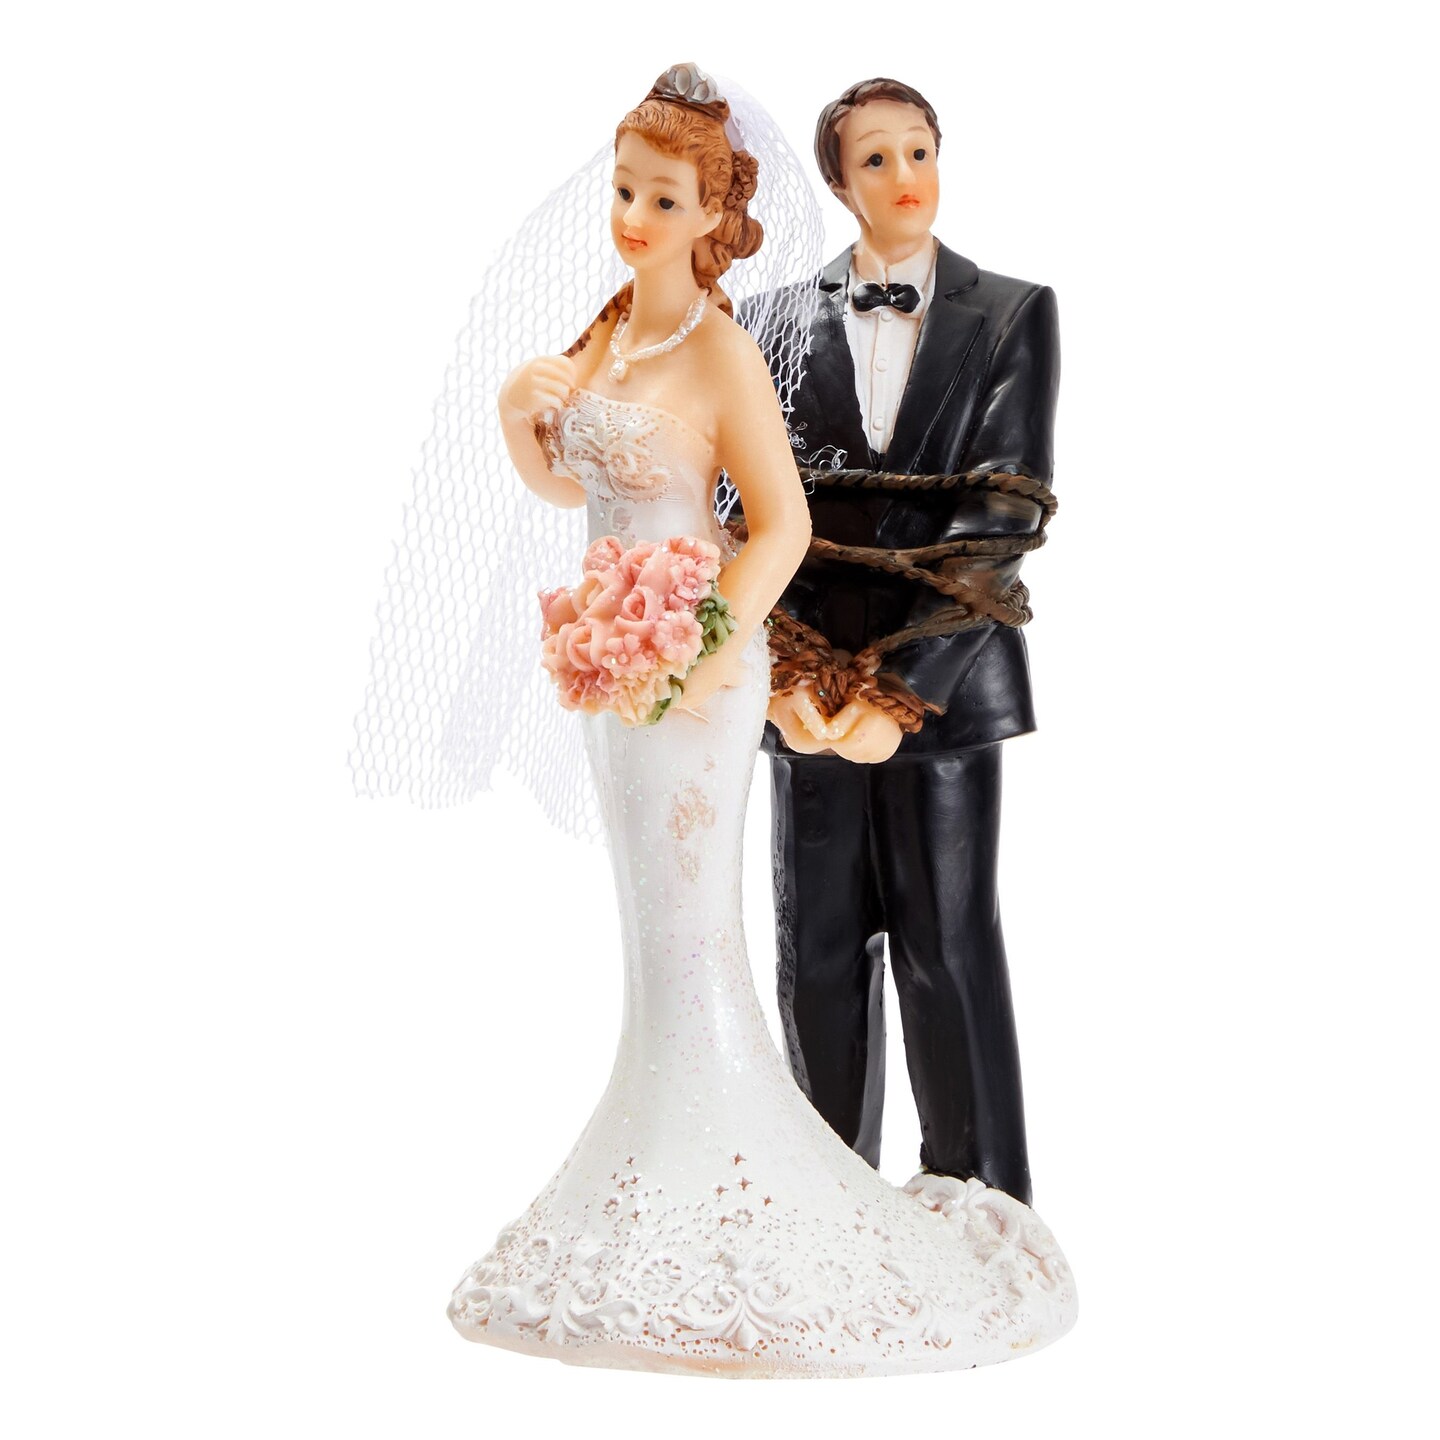 Funny Wedding Cake Topper, Bride Tied Up Groom Couple Figurine Decorations (2.6 x 4.6 x 2.3 In)